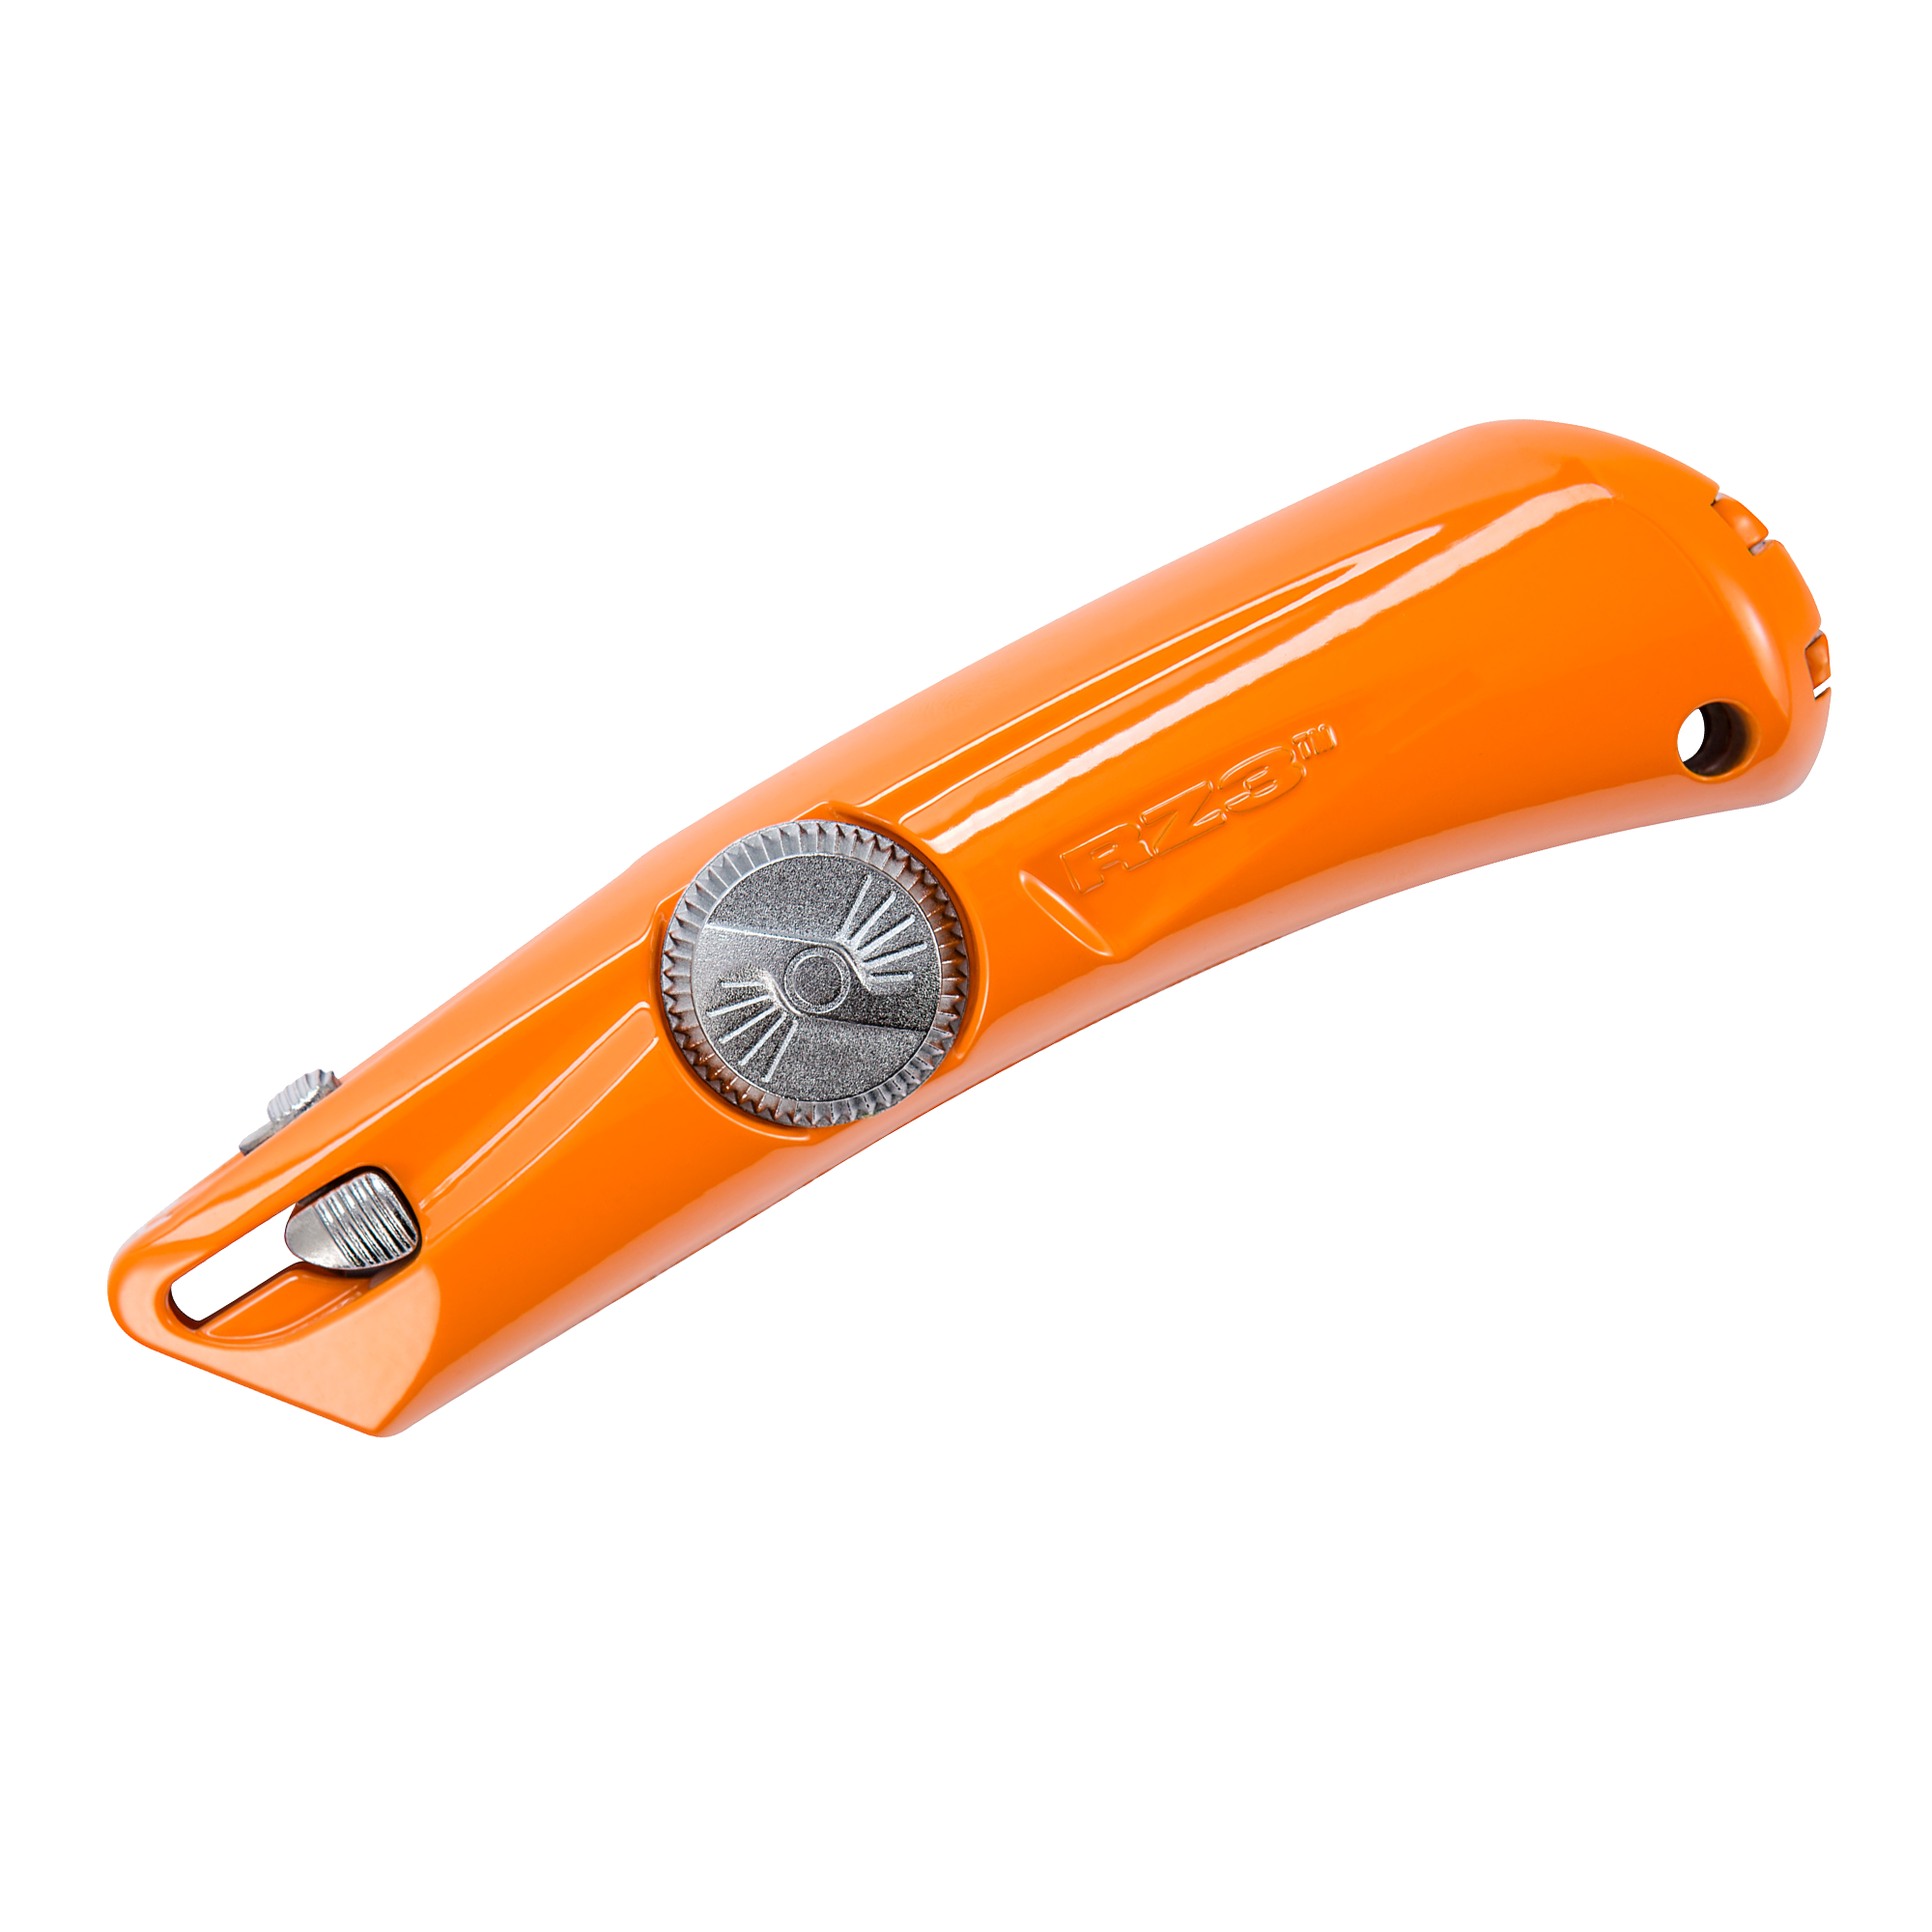 RZ3™ Safety Box Cutter For Left Or Right Hand